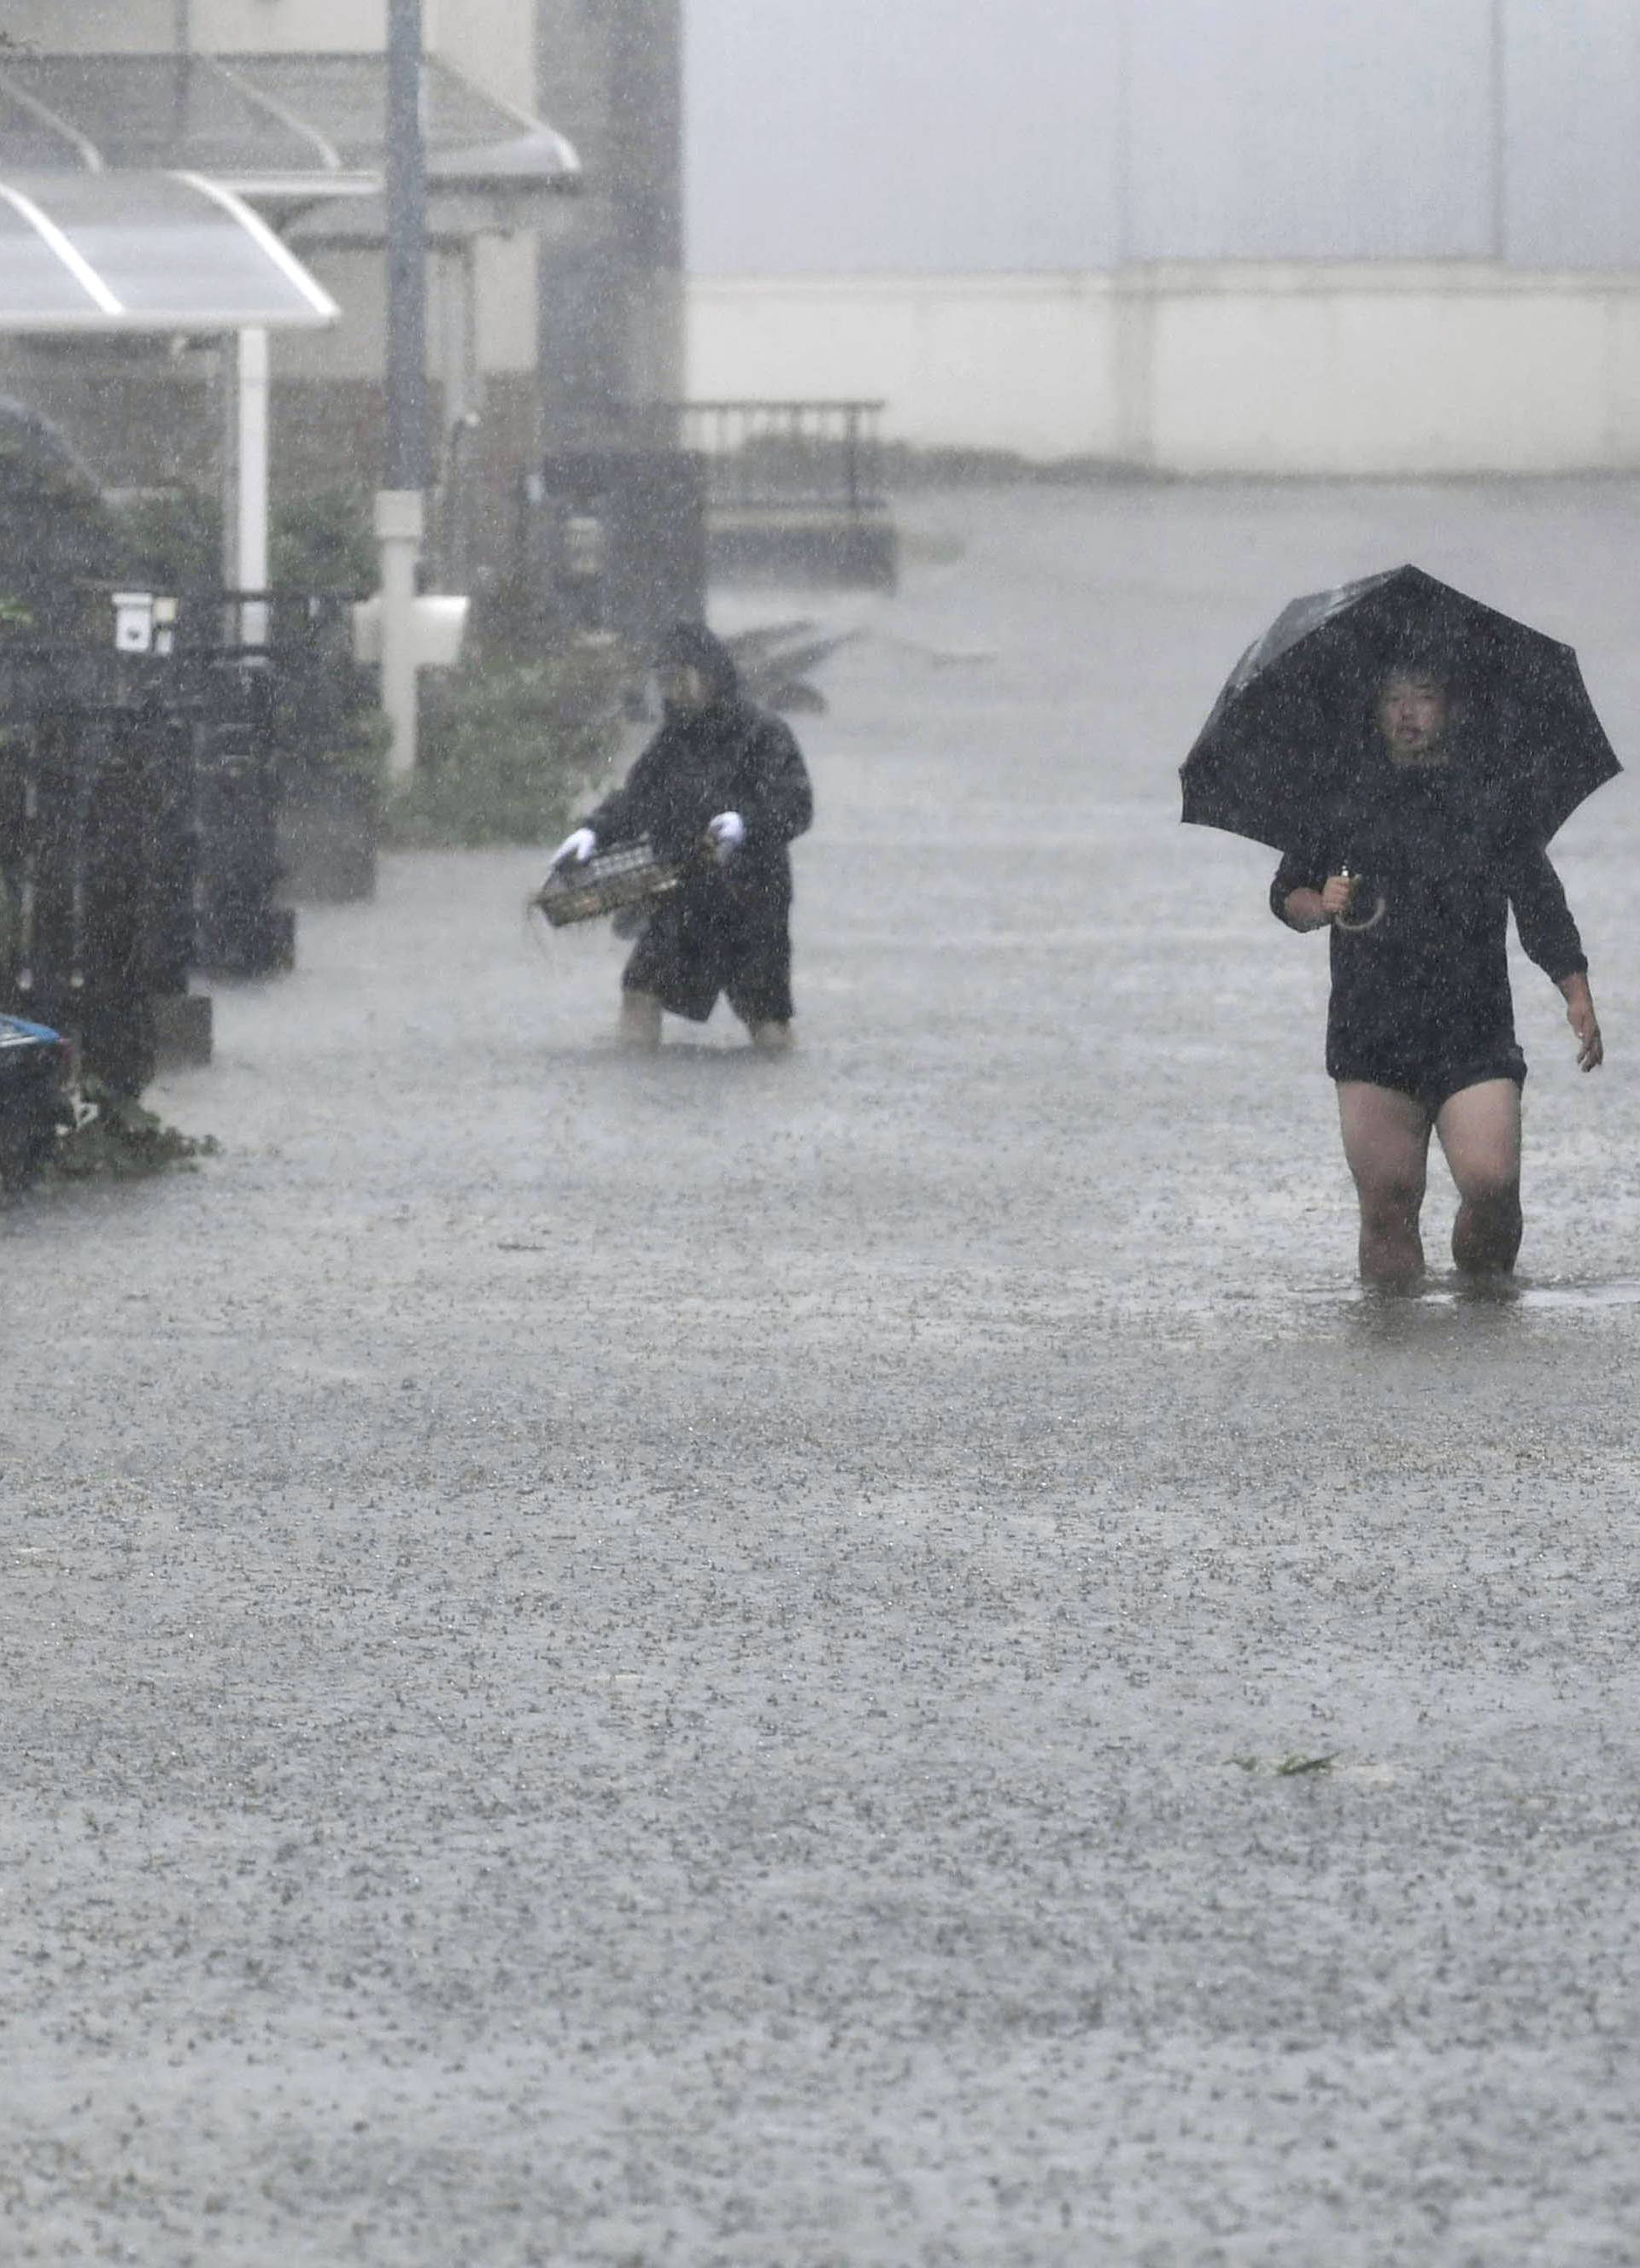 Roads are flooded due to heavy rains caused by Typhoon Hagibis in Shizuoka, Japan